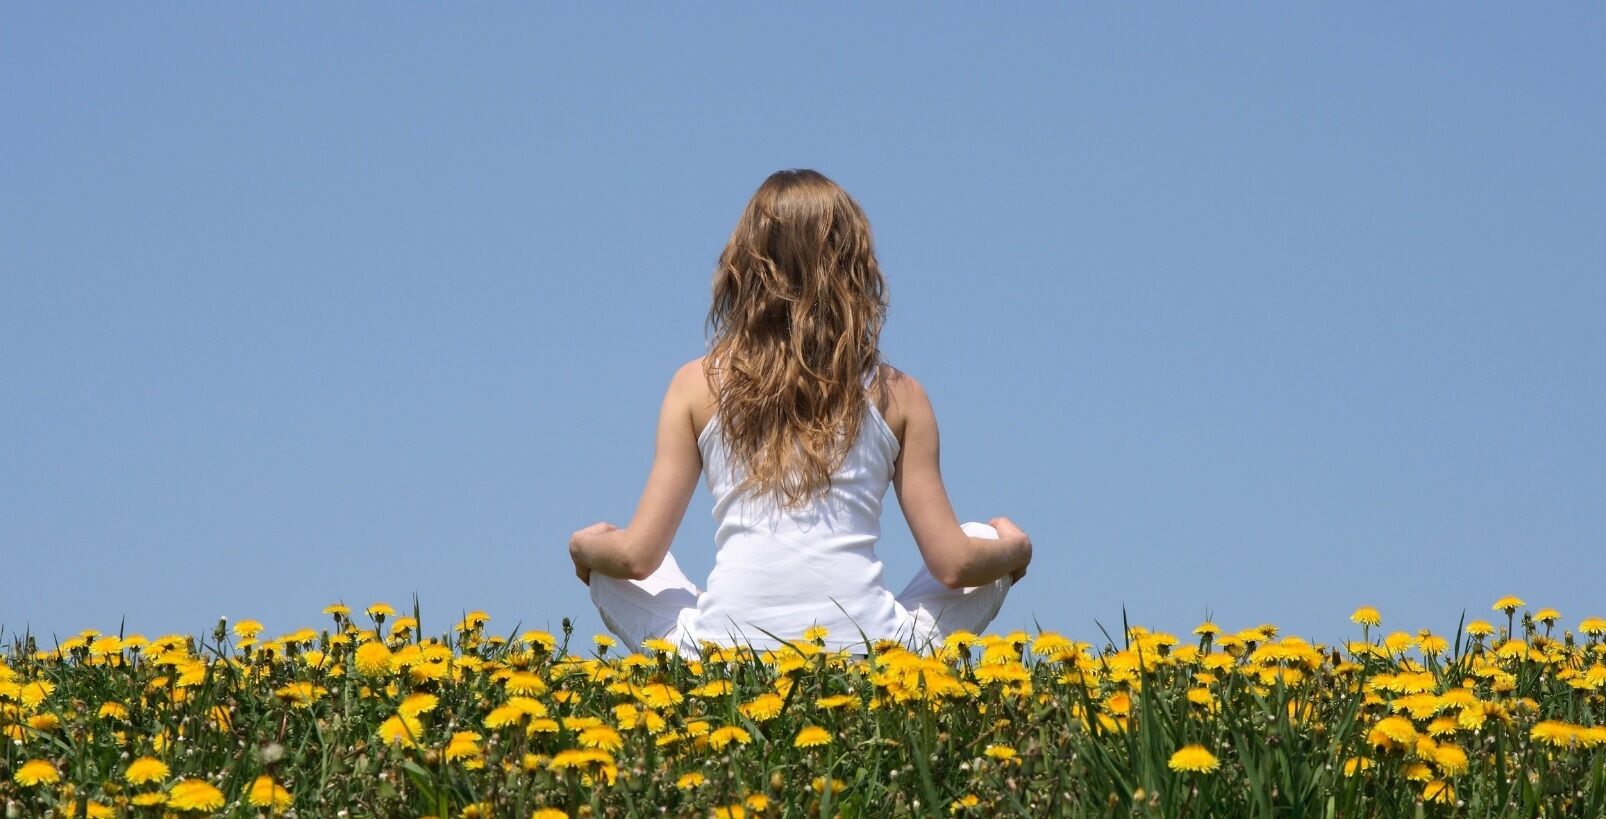 A woman practicing mindfulness while sitting peacefully in a sunflower field, illustrating the benefits of mindfulness for mental well-being.